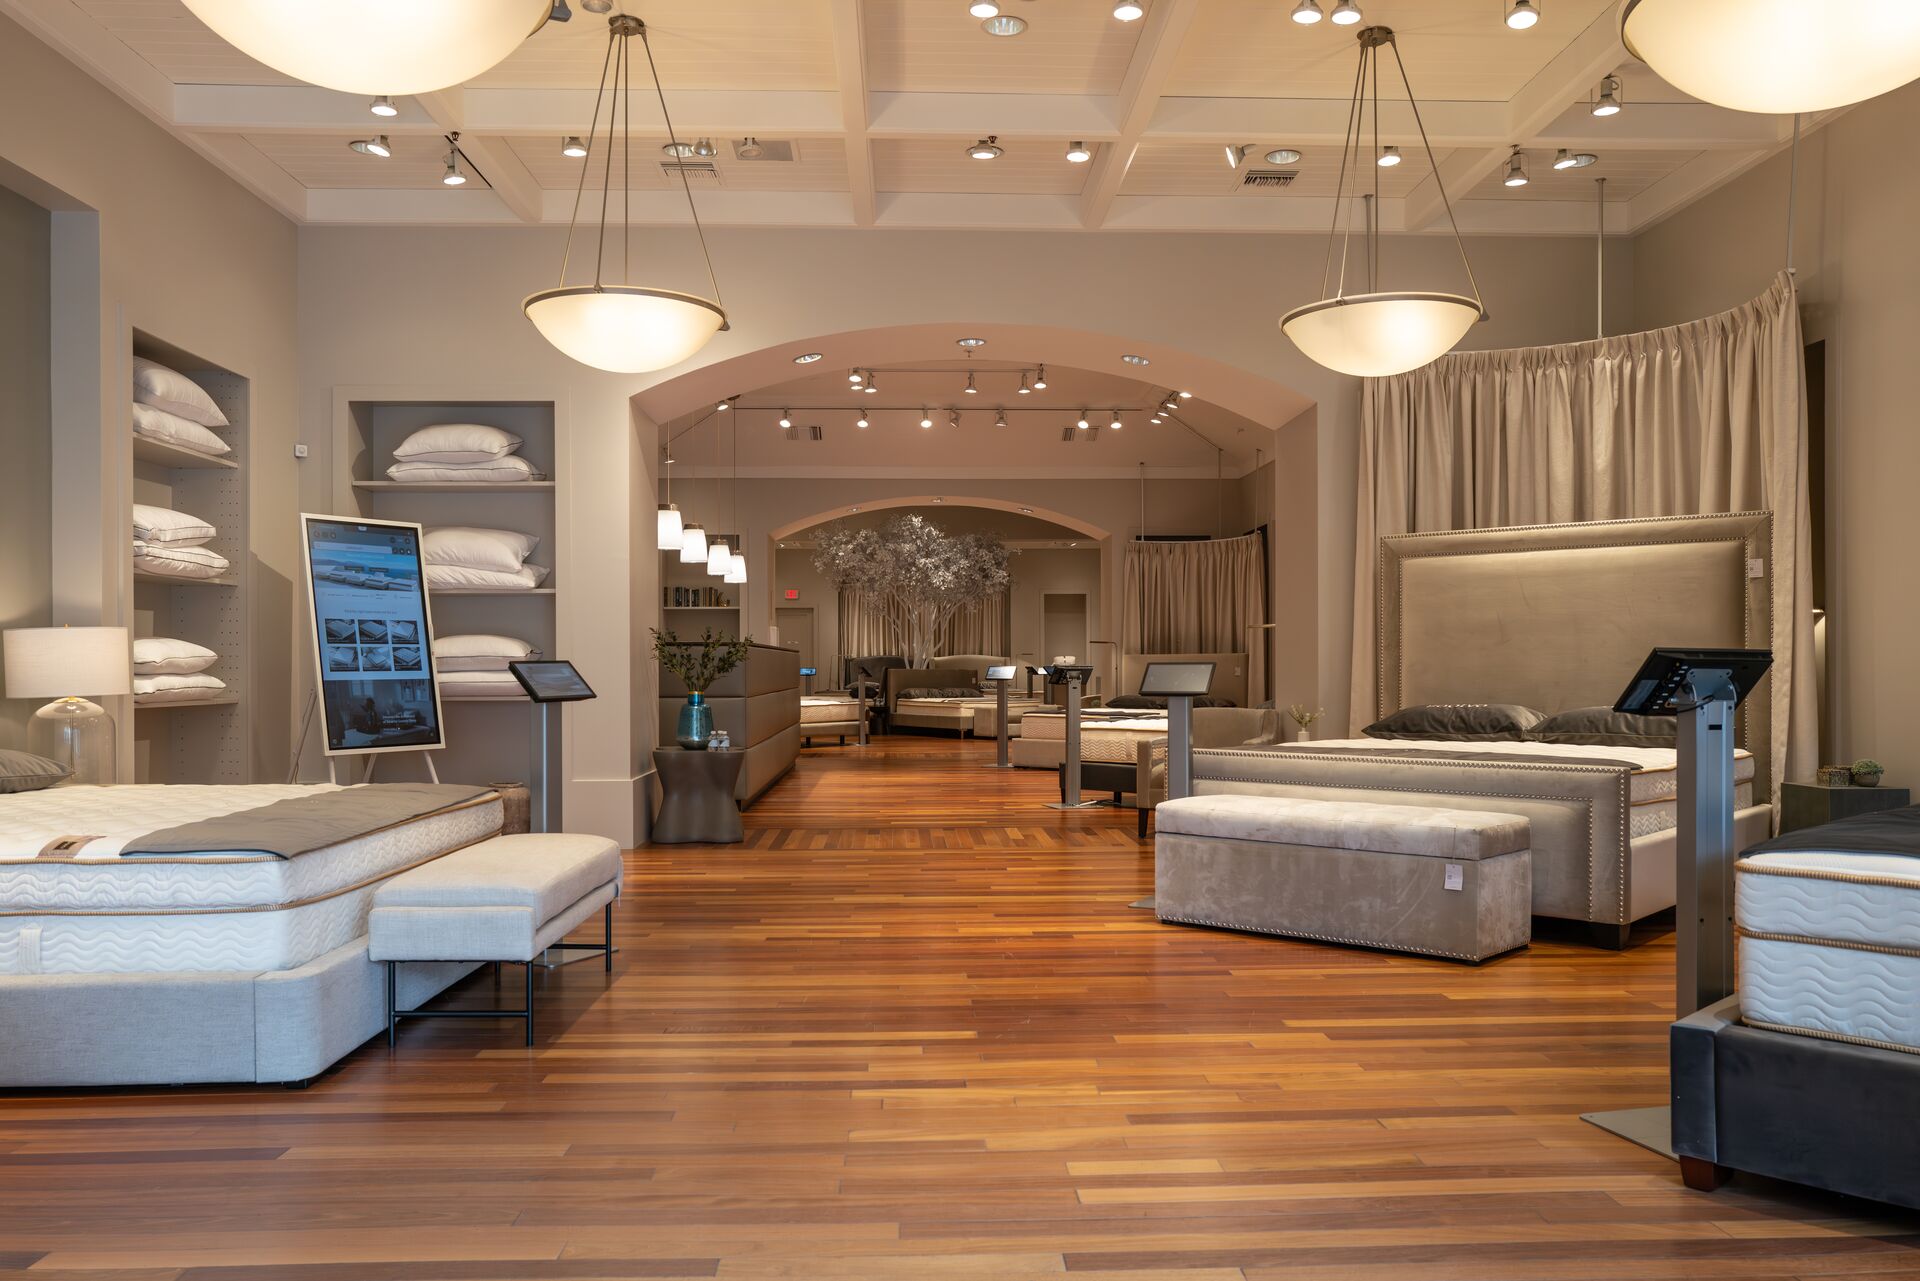 Saatva's luxurious store interior at the Westfield UTC Mall that helps San Diego locals escape everyday with the best-in-class mattress and sleep accessories.